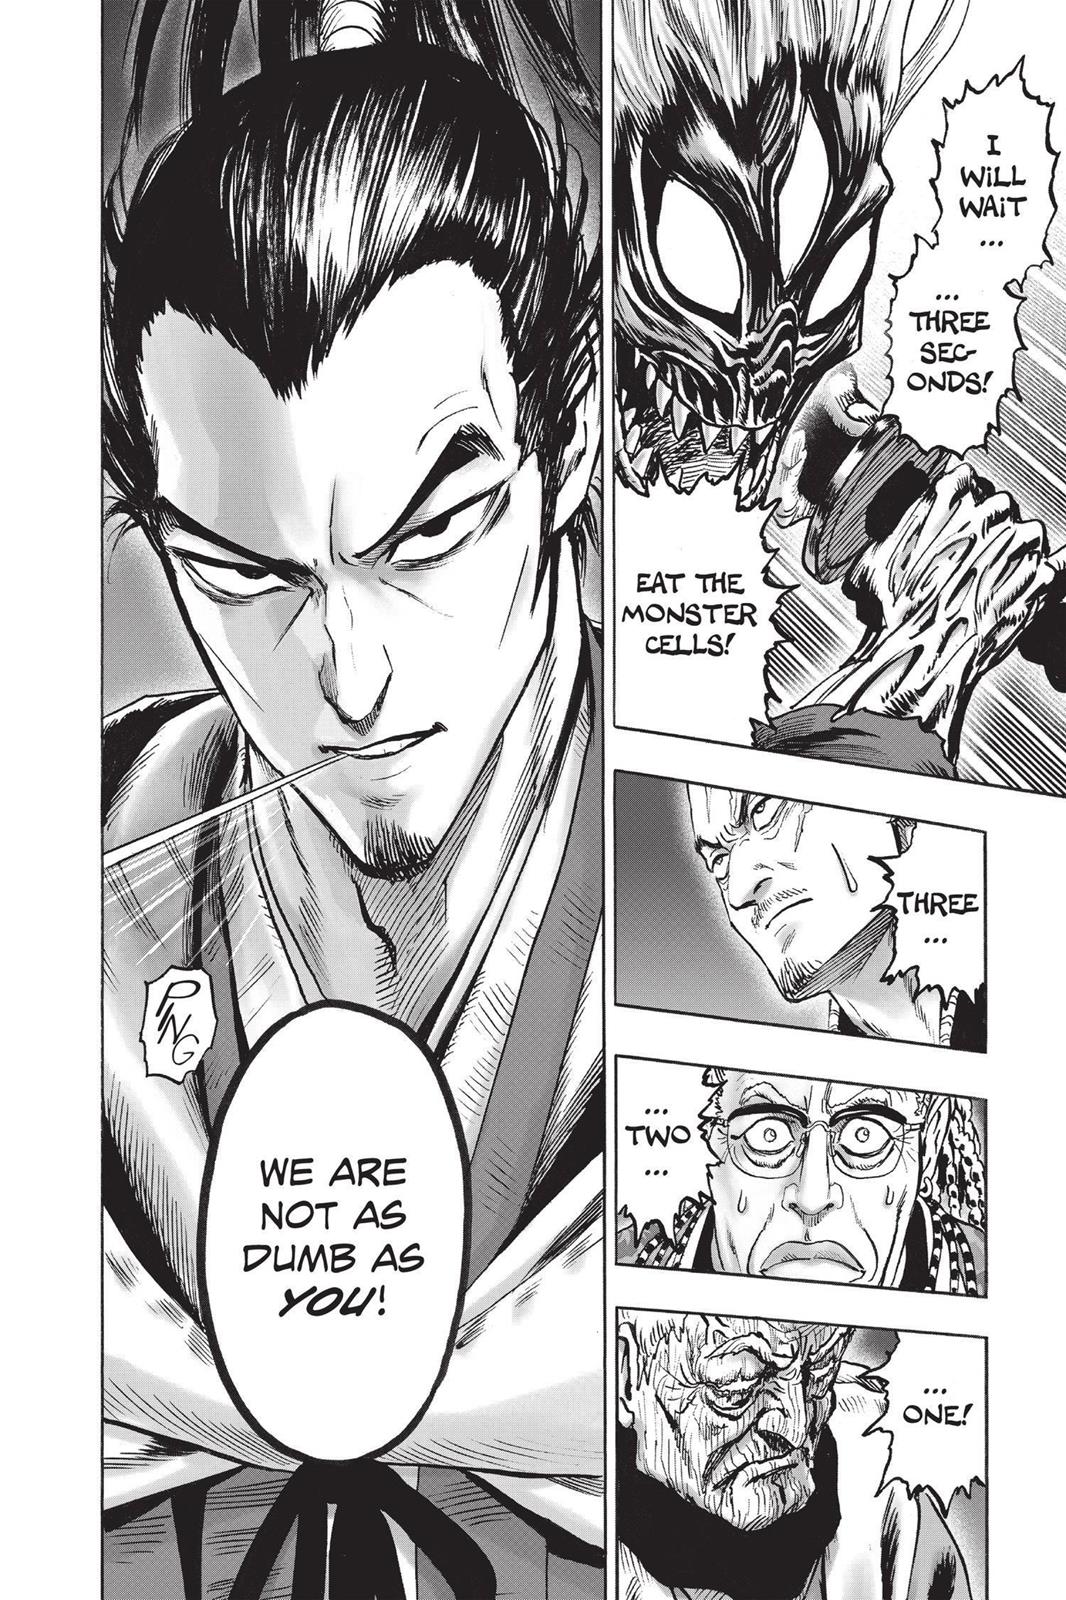 One-Punch Man, Punch 69 image 22